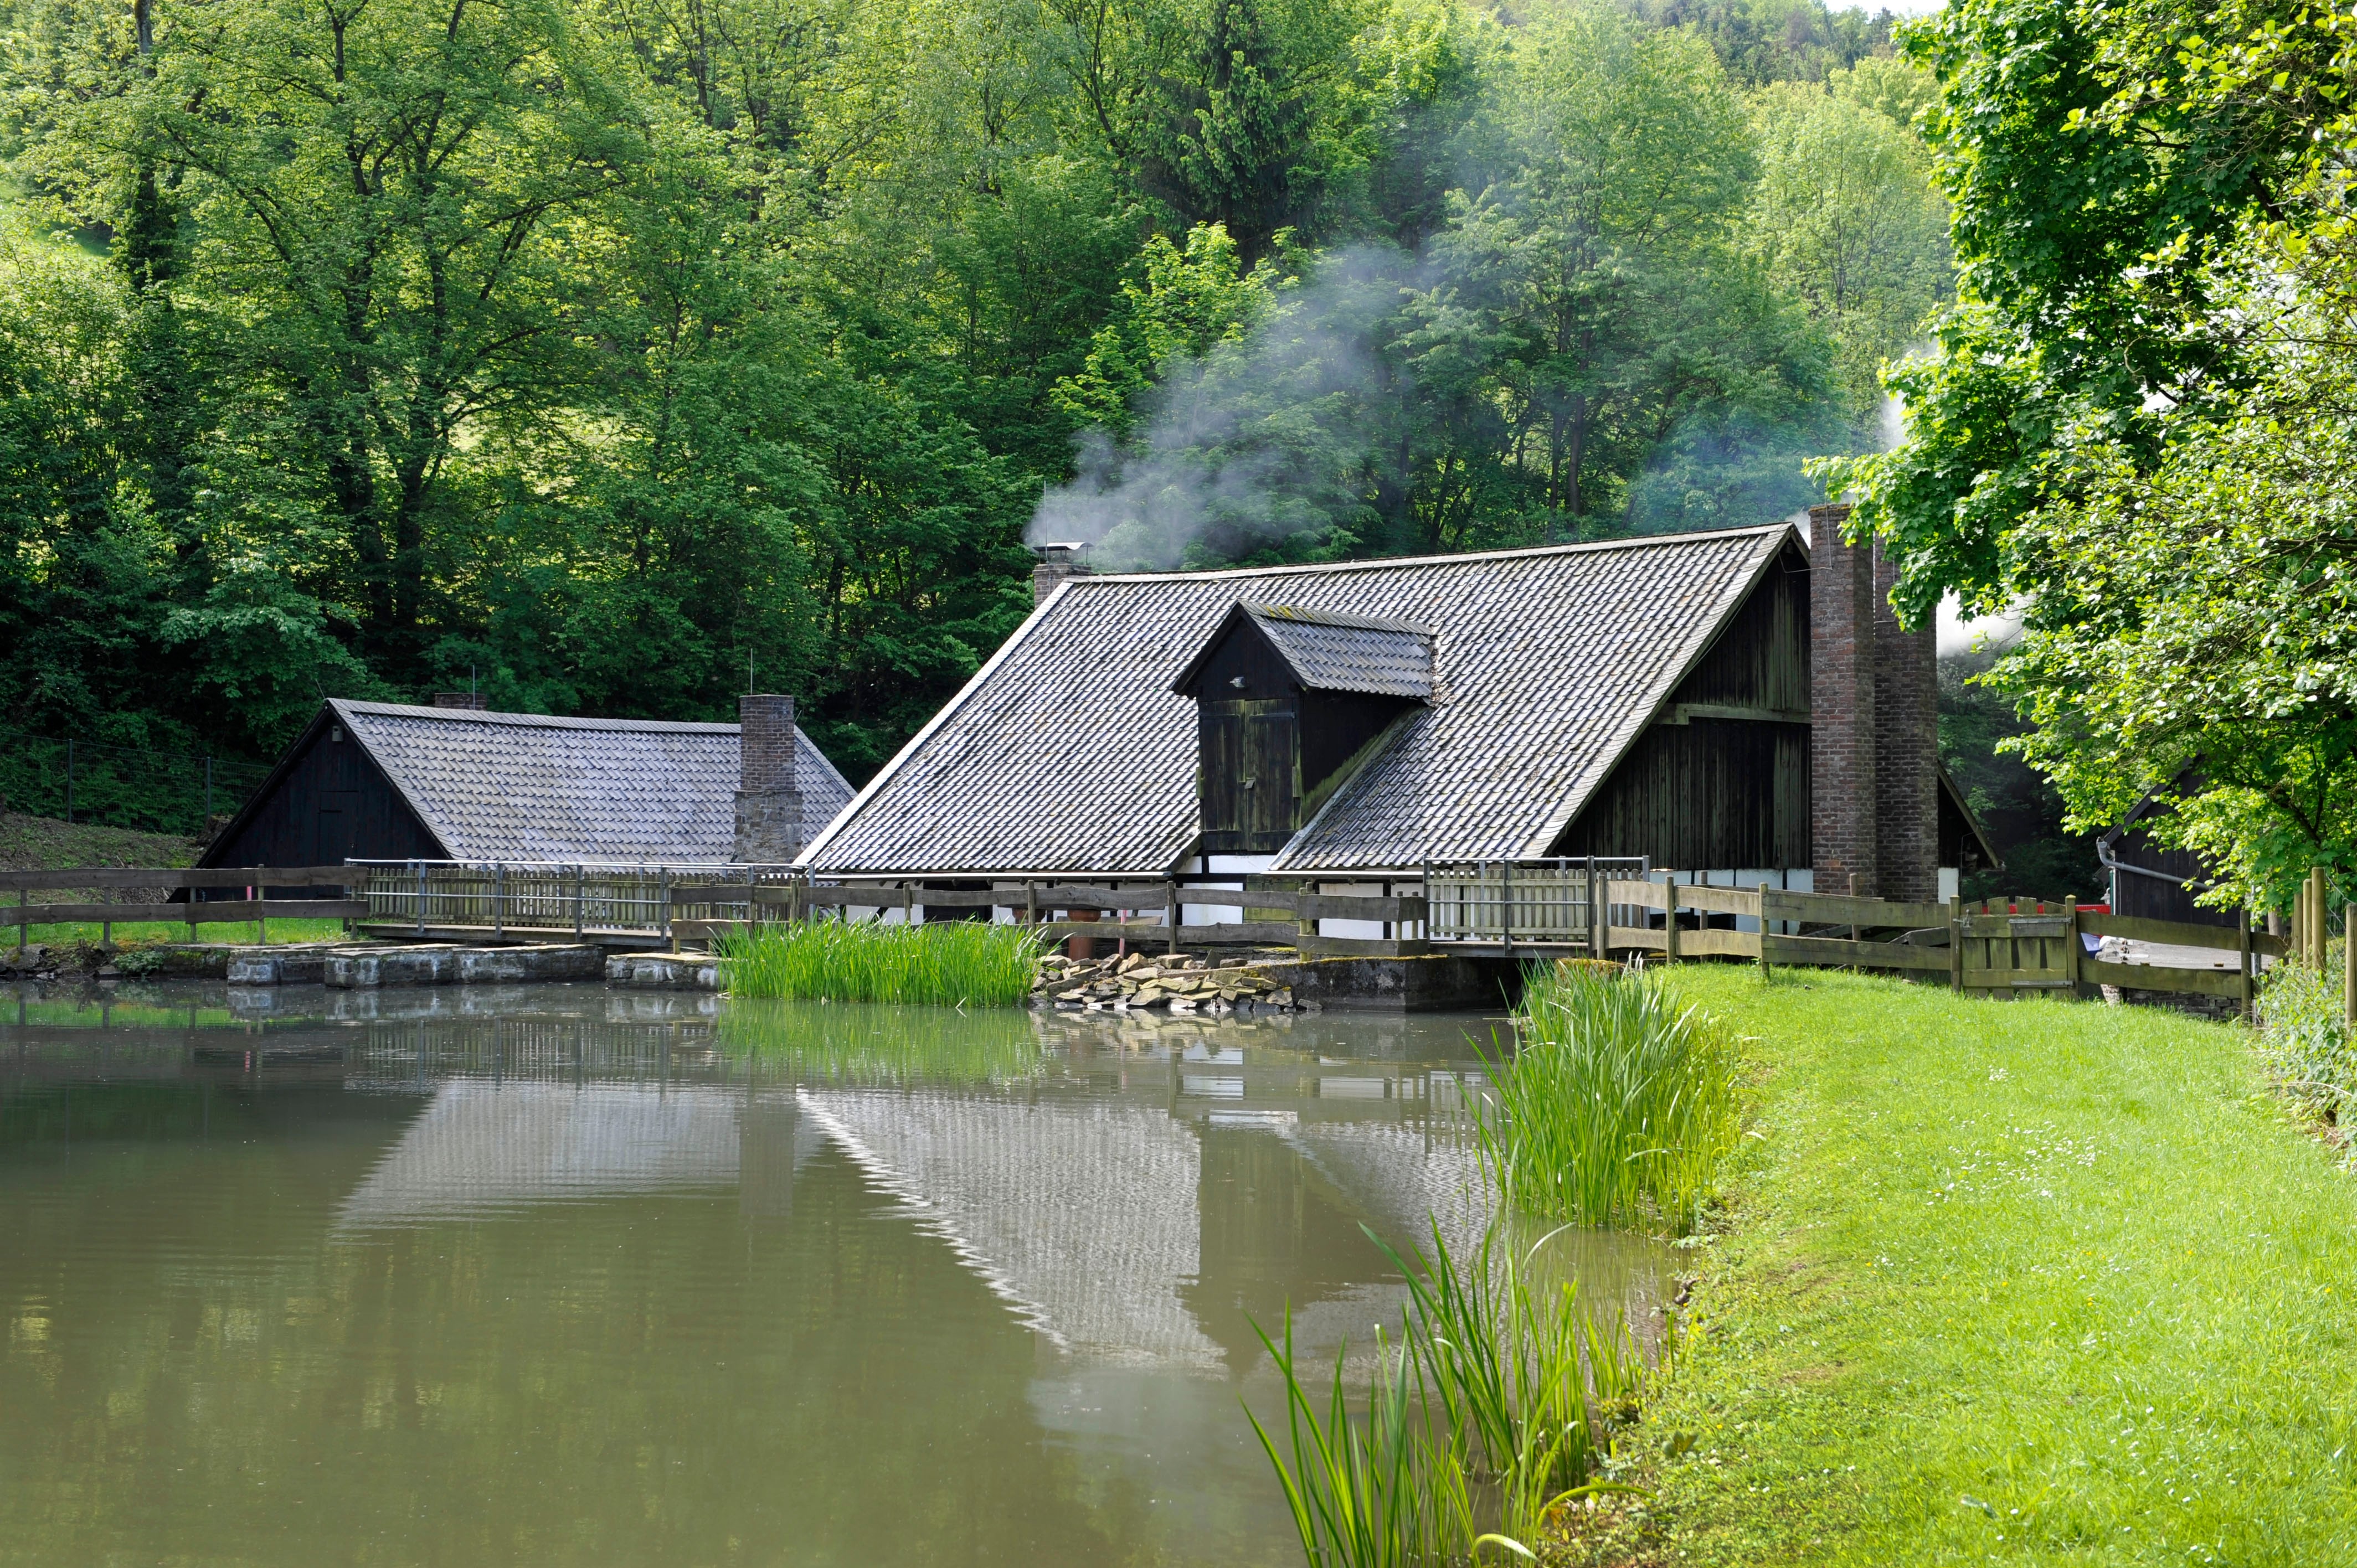 The Oelchenshammer (Forging Hammer) is one of the last functioning water-powered forging hammers in the Oberbergisches Land. During the season from April to October the more than 200 year-old complex presents a lively picture of how steel was produced using fire and water.